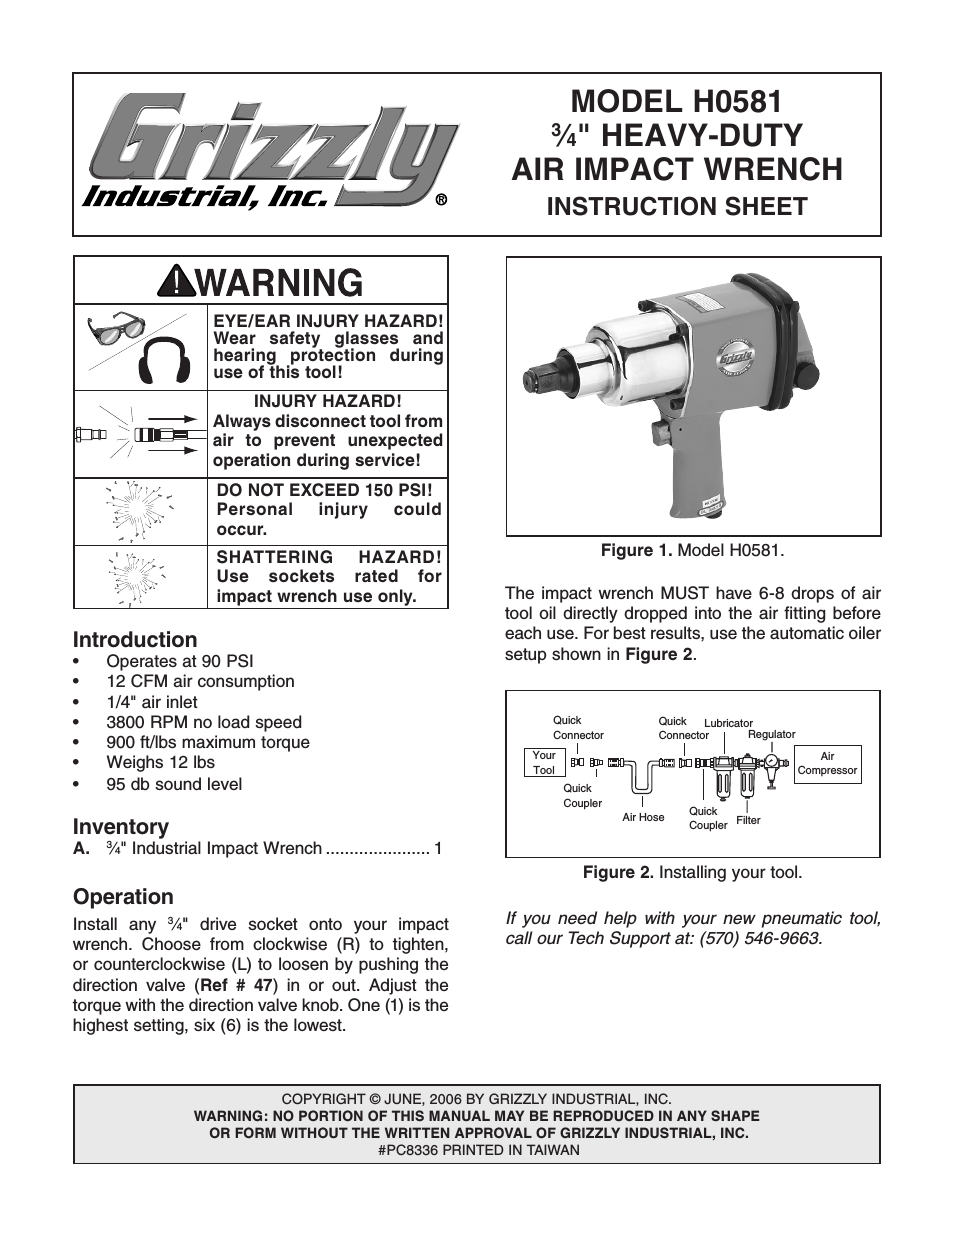 3/4" Heavy Duty Air Impact Wrench H0581 (Page 1)